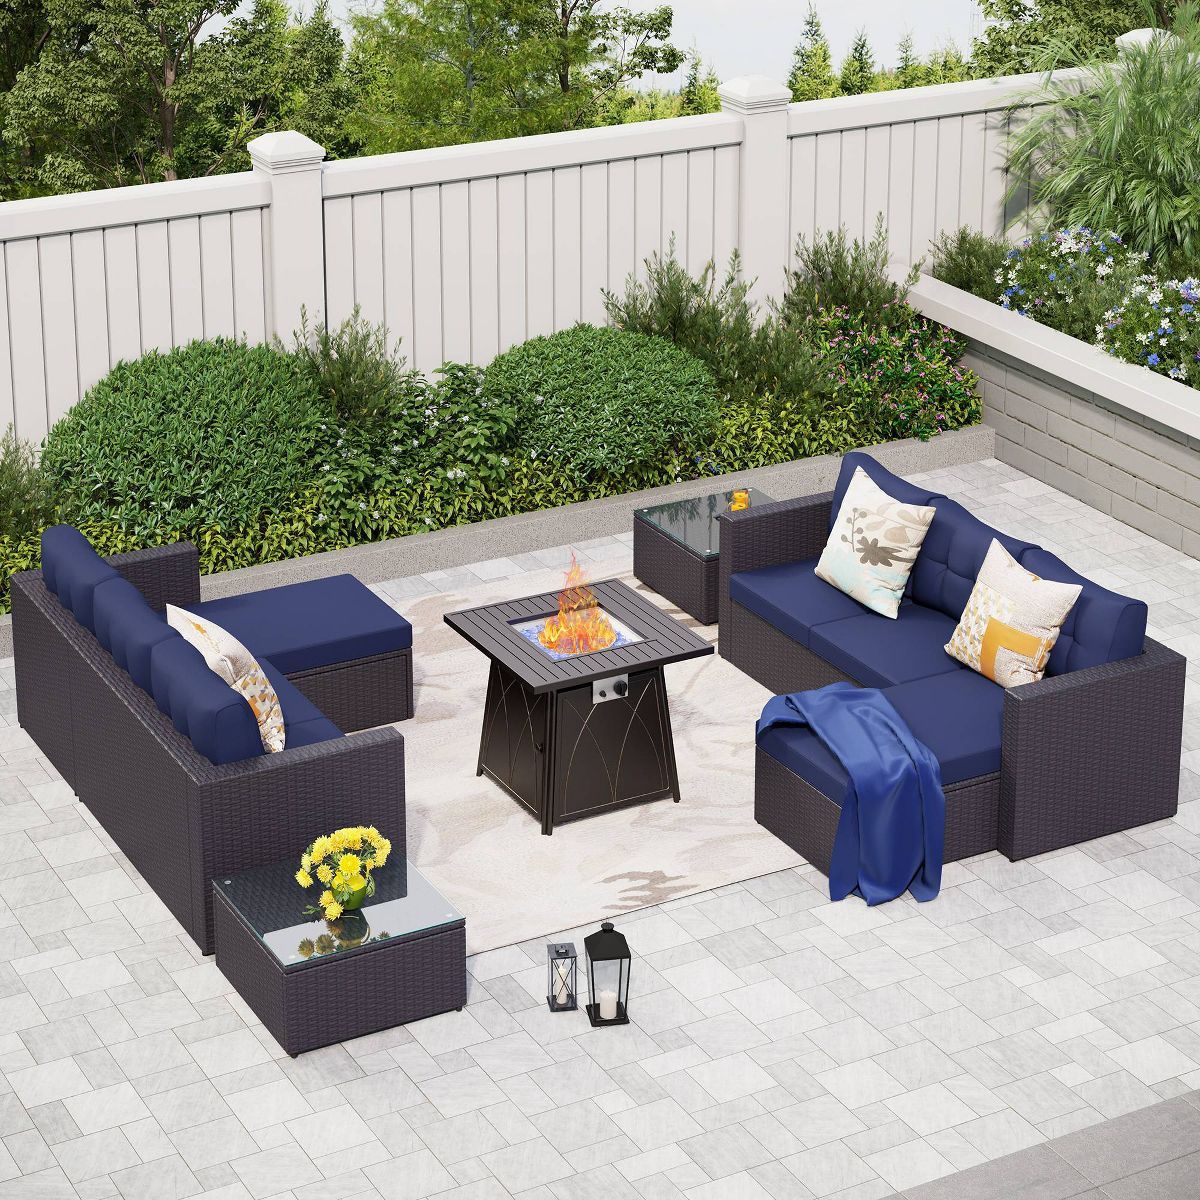 Captiva Designs 7pc Steel & Wicker Outdoor Square Fire Pit Furniture Set with Cushions | Target